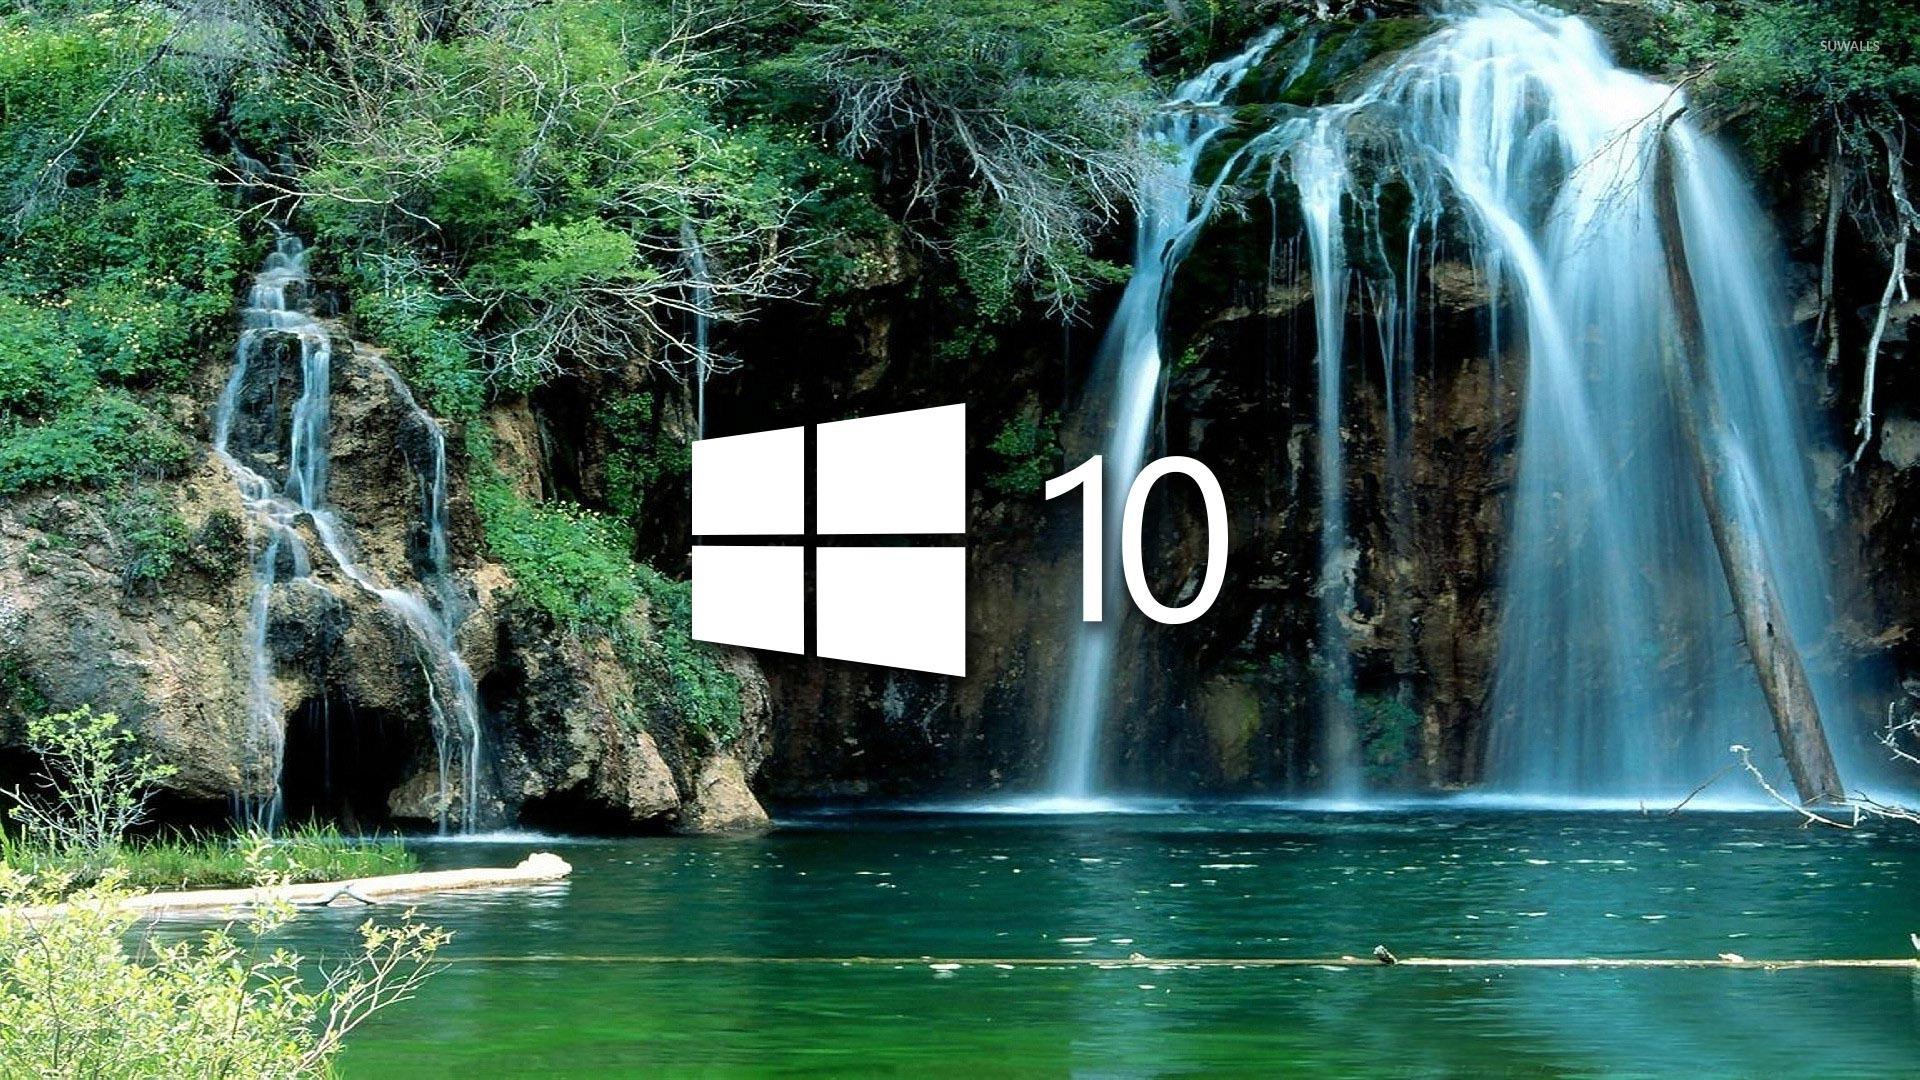 cool live wallpapers for windows 10